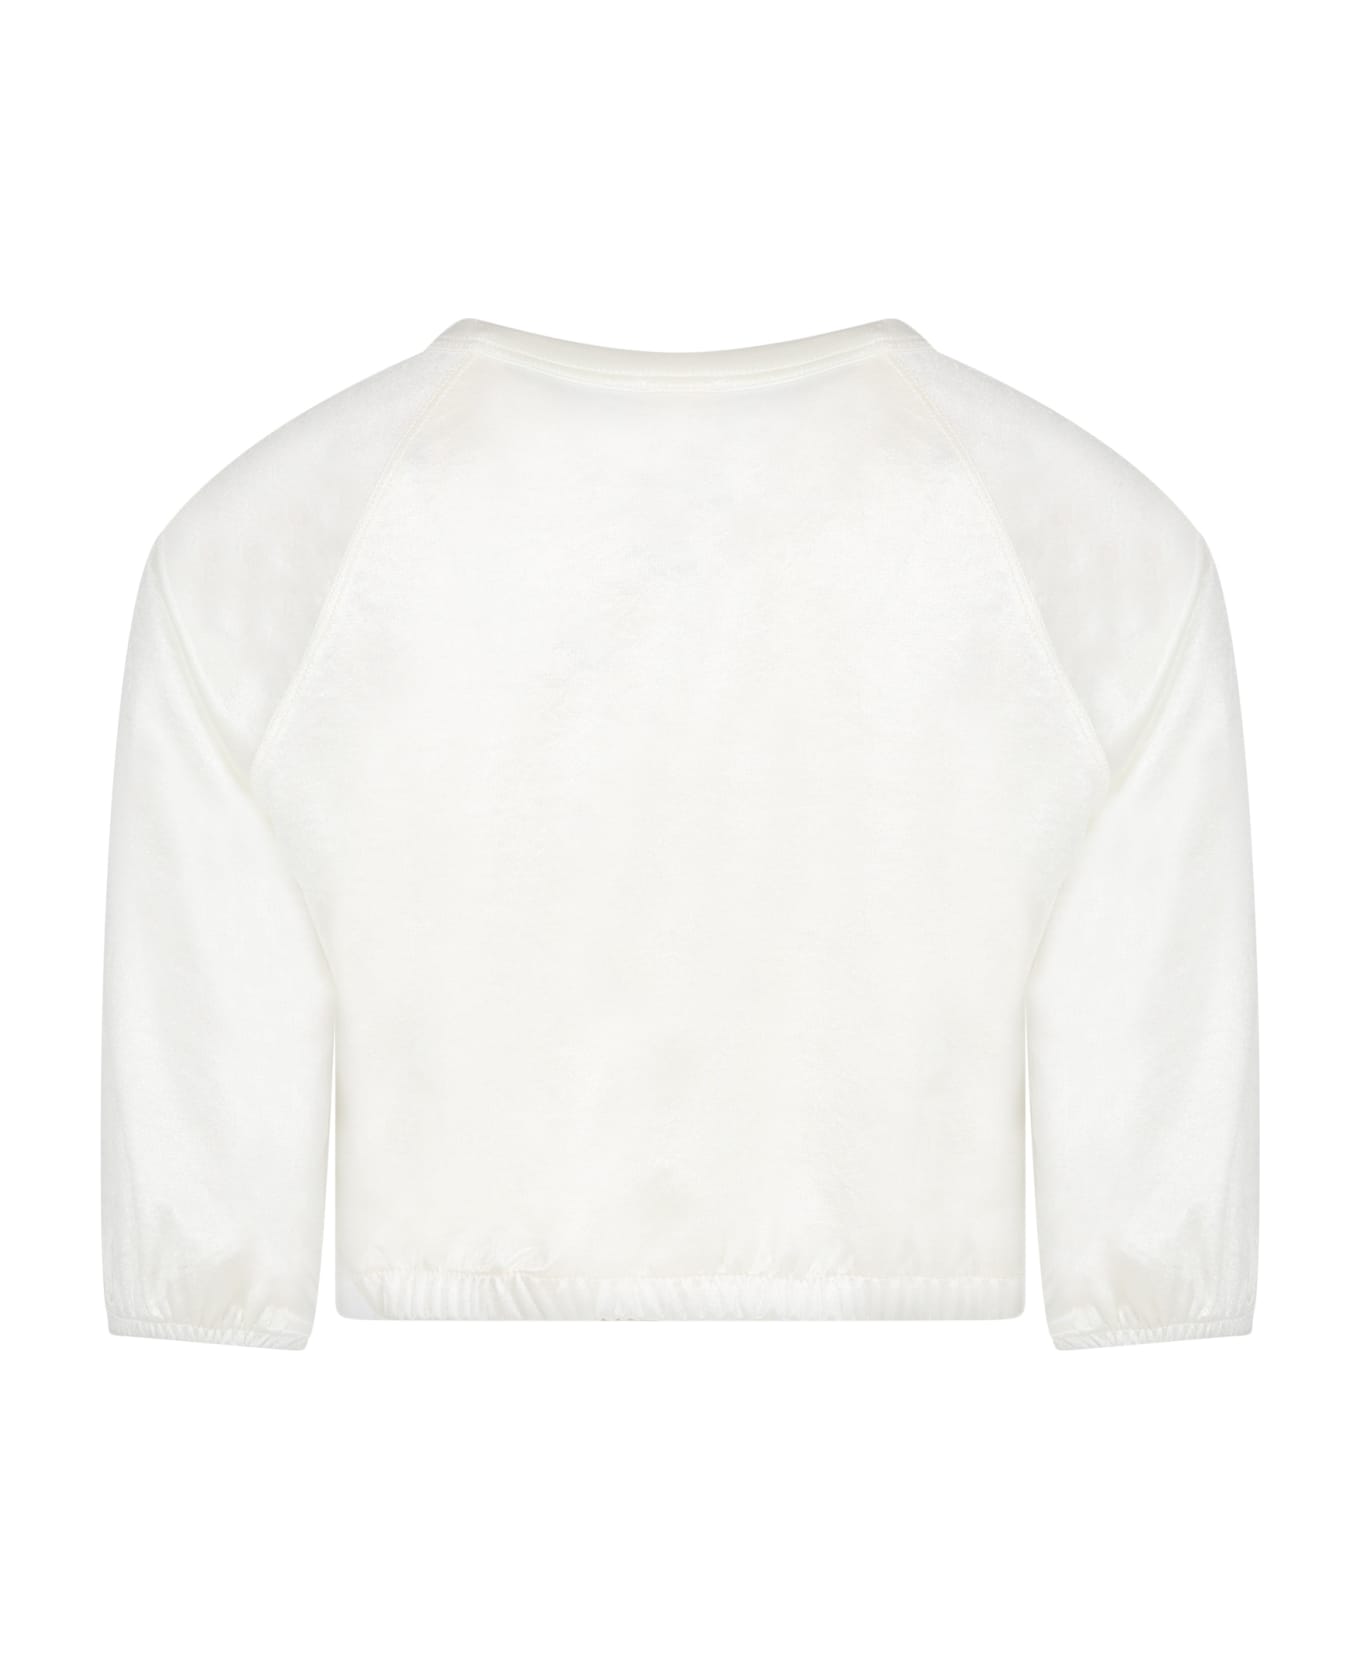 Caffe' d'Orzo Ivory Sweatshirt For Girl - Ivory